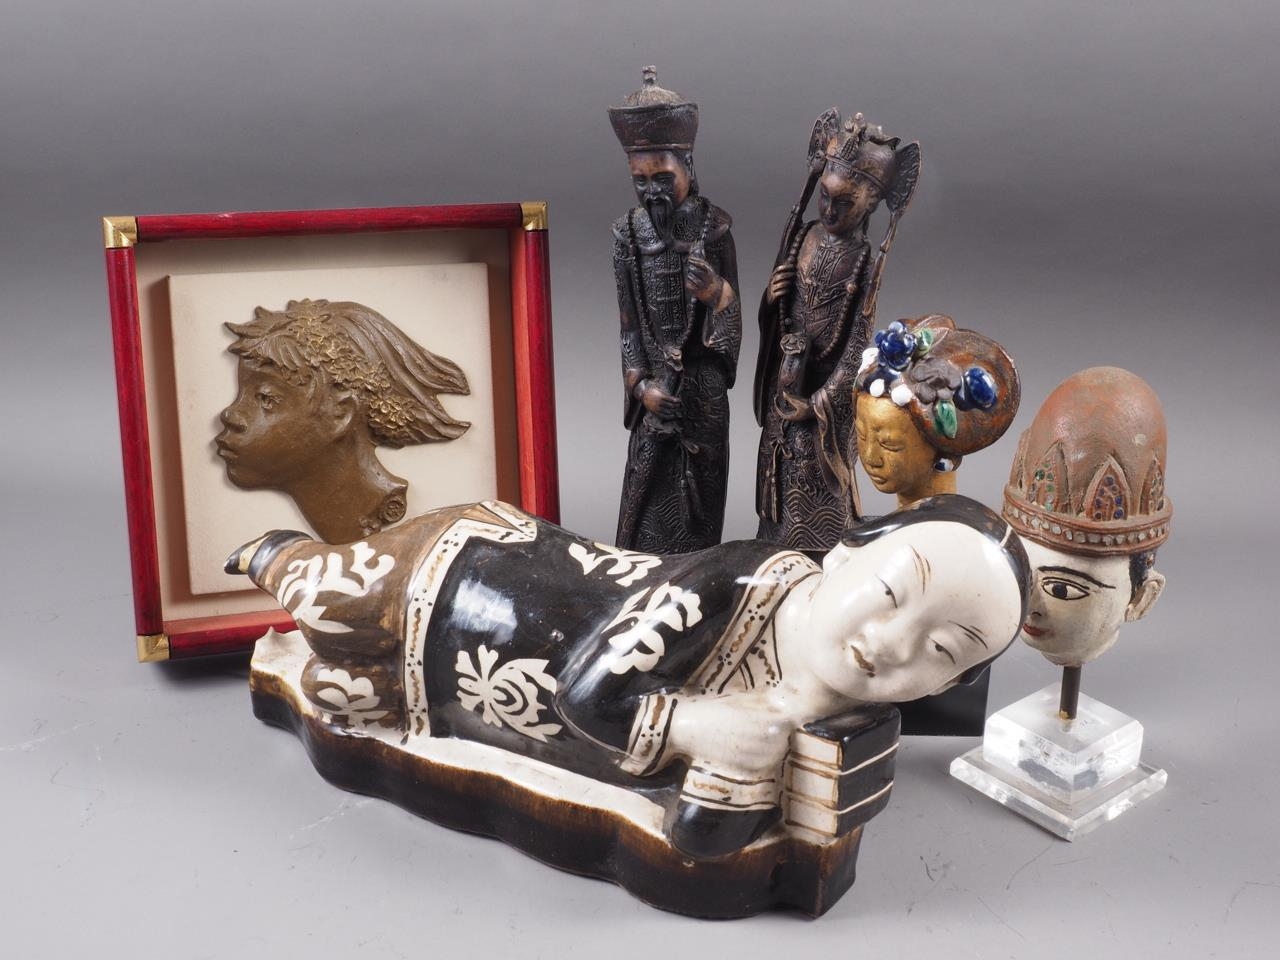 A Chinese pottery reclining figure, 14 1/4" long, two resin figures, two busts and a plaque